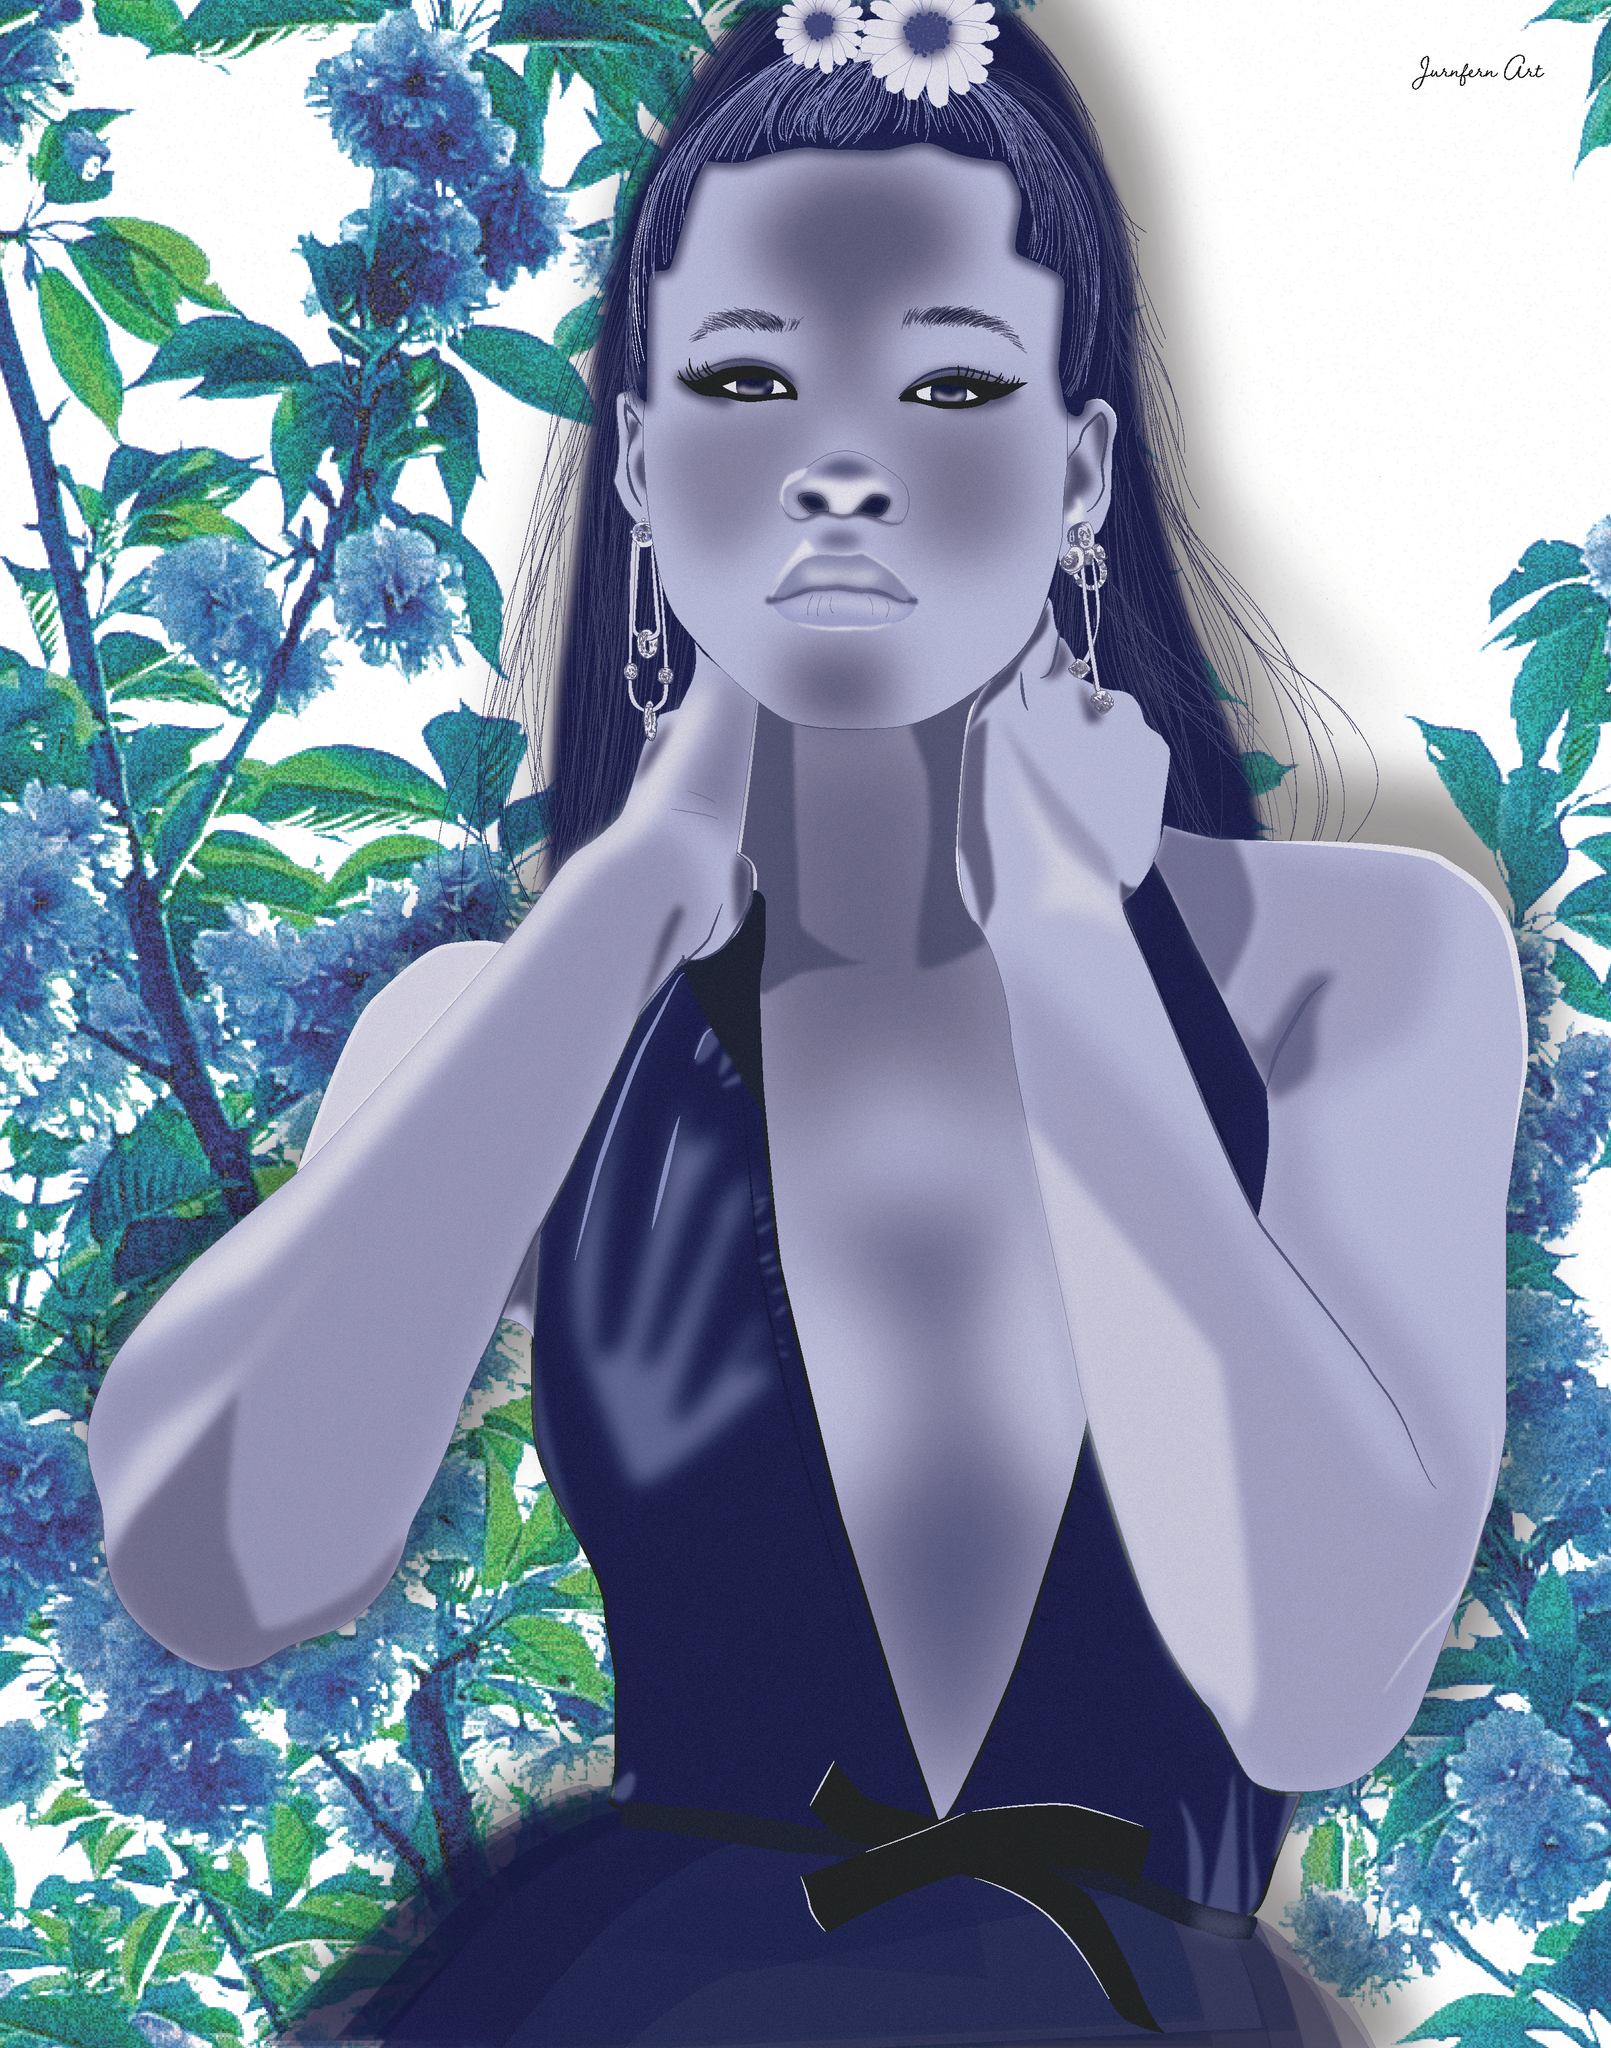 A digital illustration print of actress Storm Reid posing in a dark blue V-neck dress with daisies in her hair, and a blue floral background